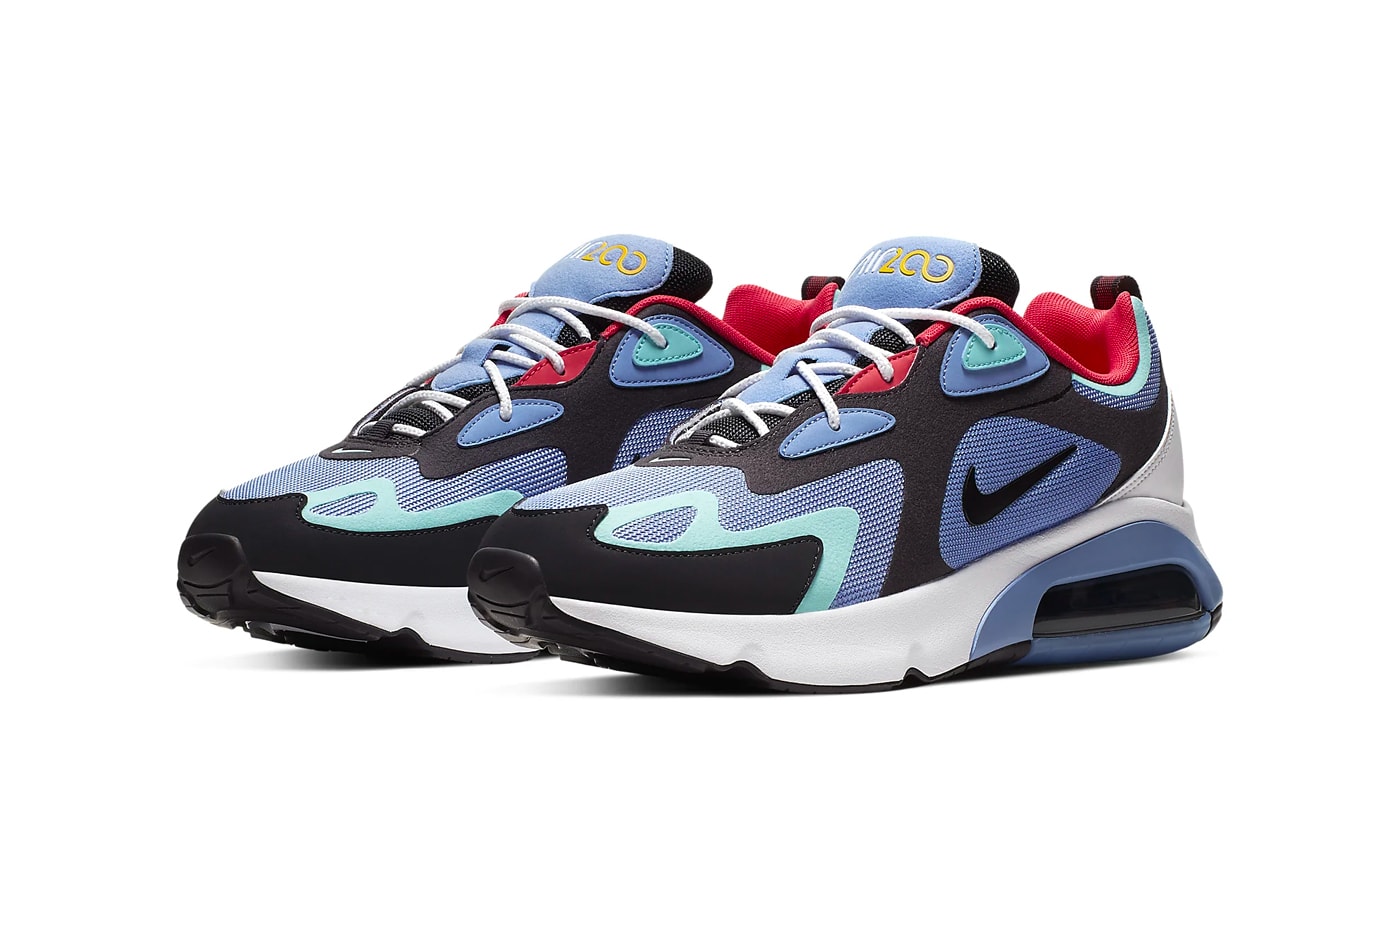 Nike Air Max 200 1992 World Stage Release Info AQ2568-401 blue white red black